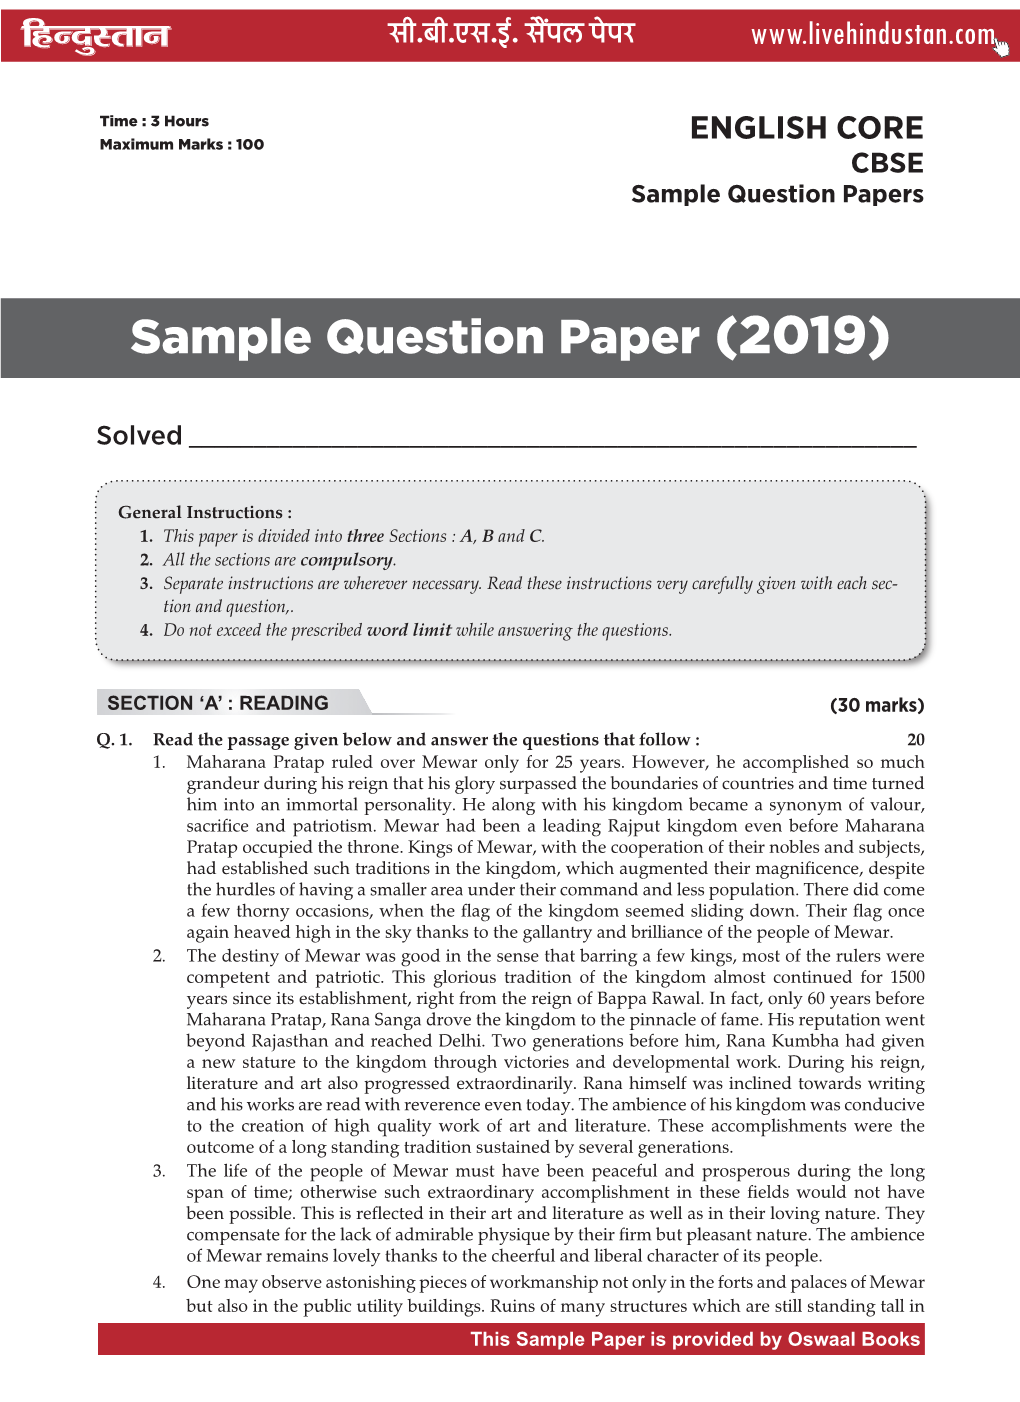 Sample Question Paper (2019)